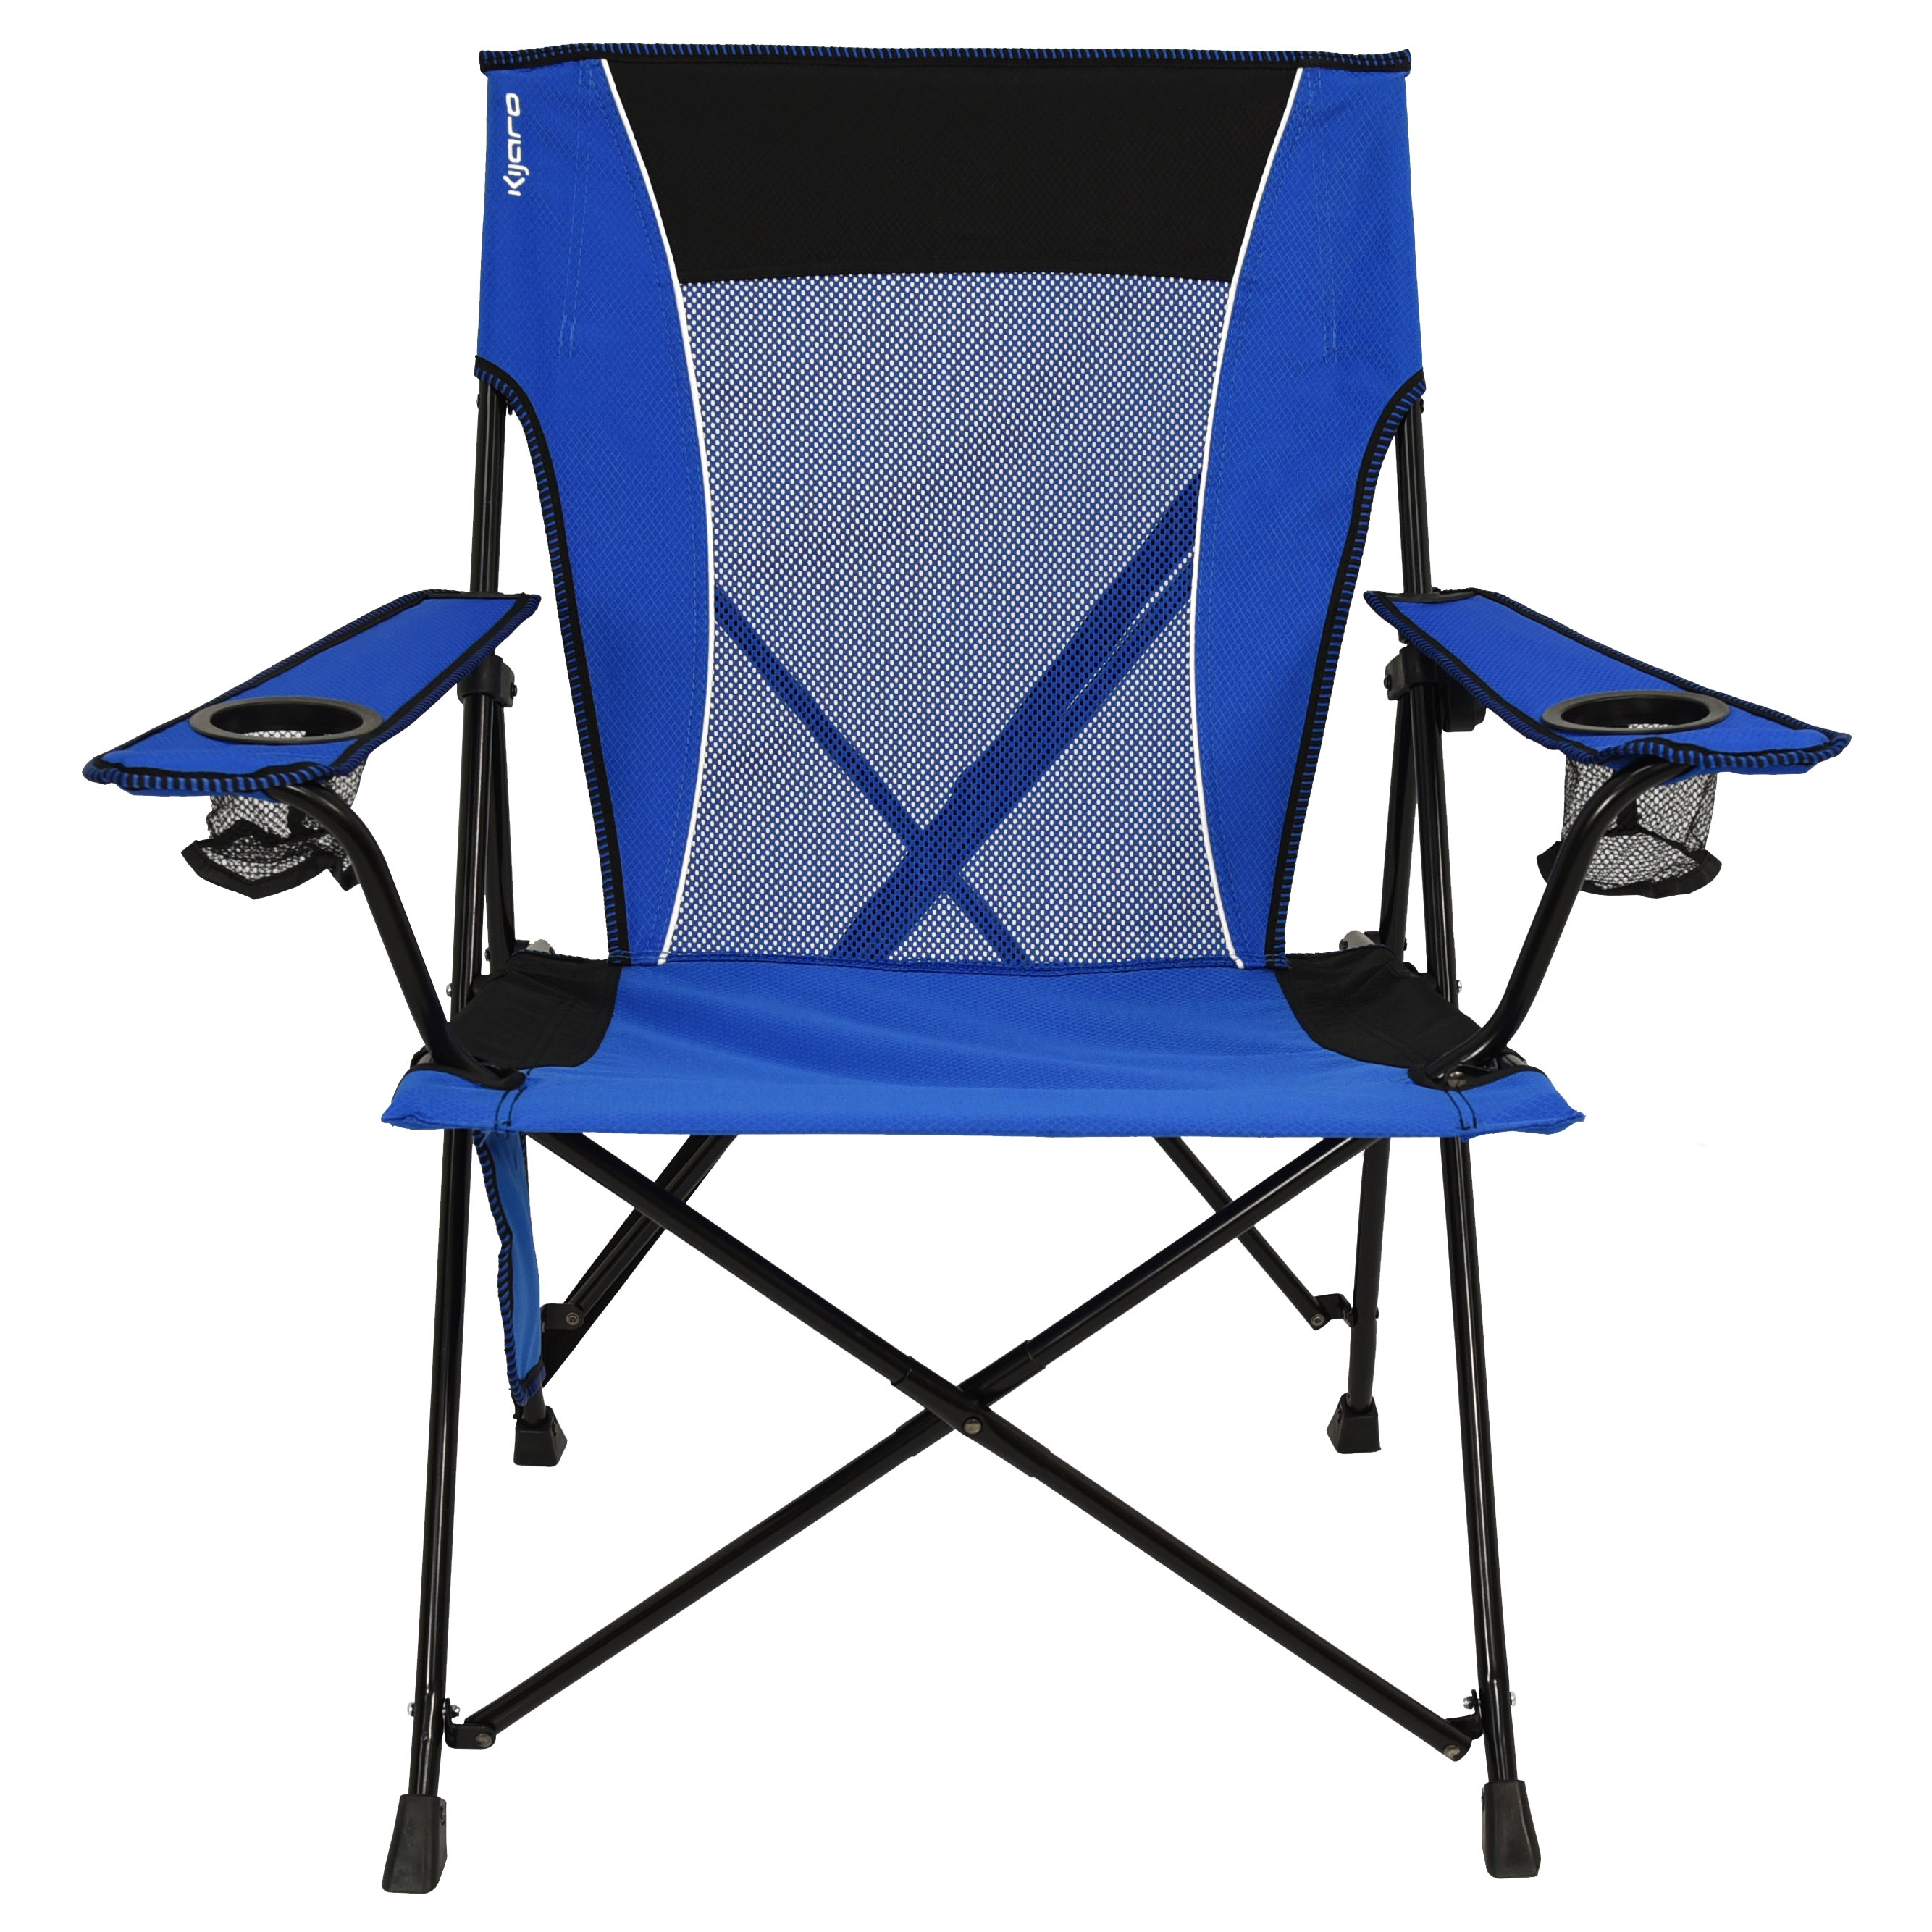 Kijaro Maldives Blue Recycled Repreve Fabric Dual Lock Camping Chair, 26 in. L x 35.5 in. W x 37 in" H, Weight 9.6 lbs. - image 1 of 3